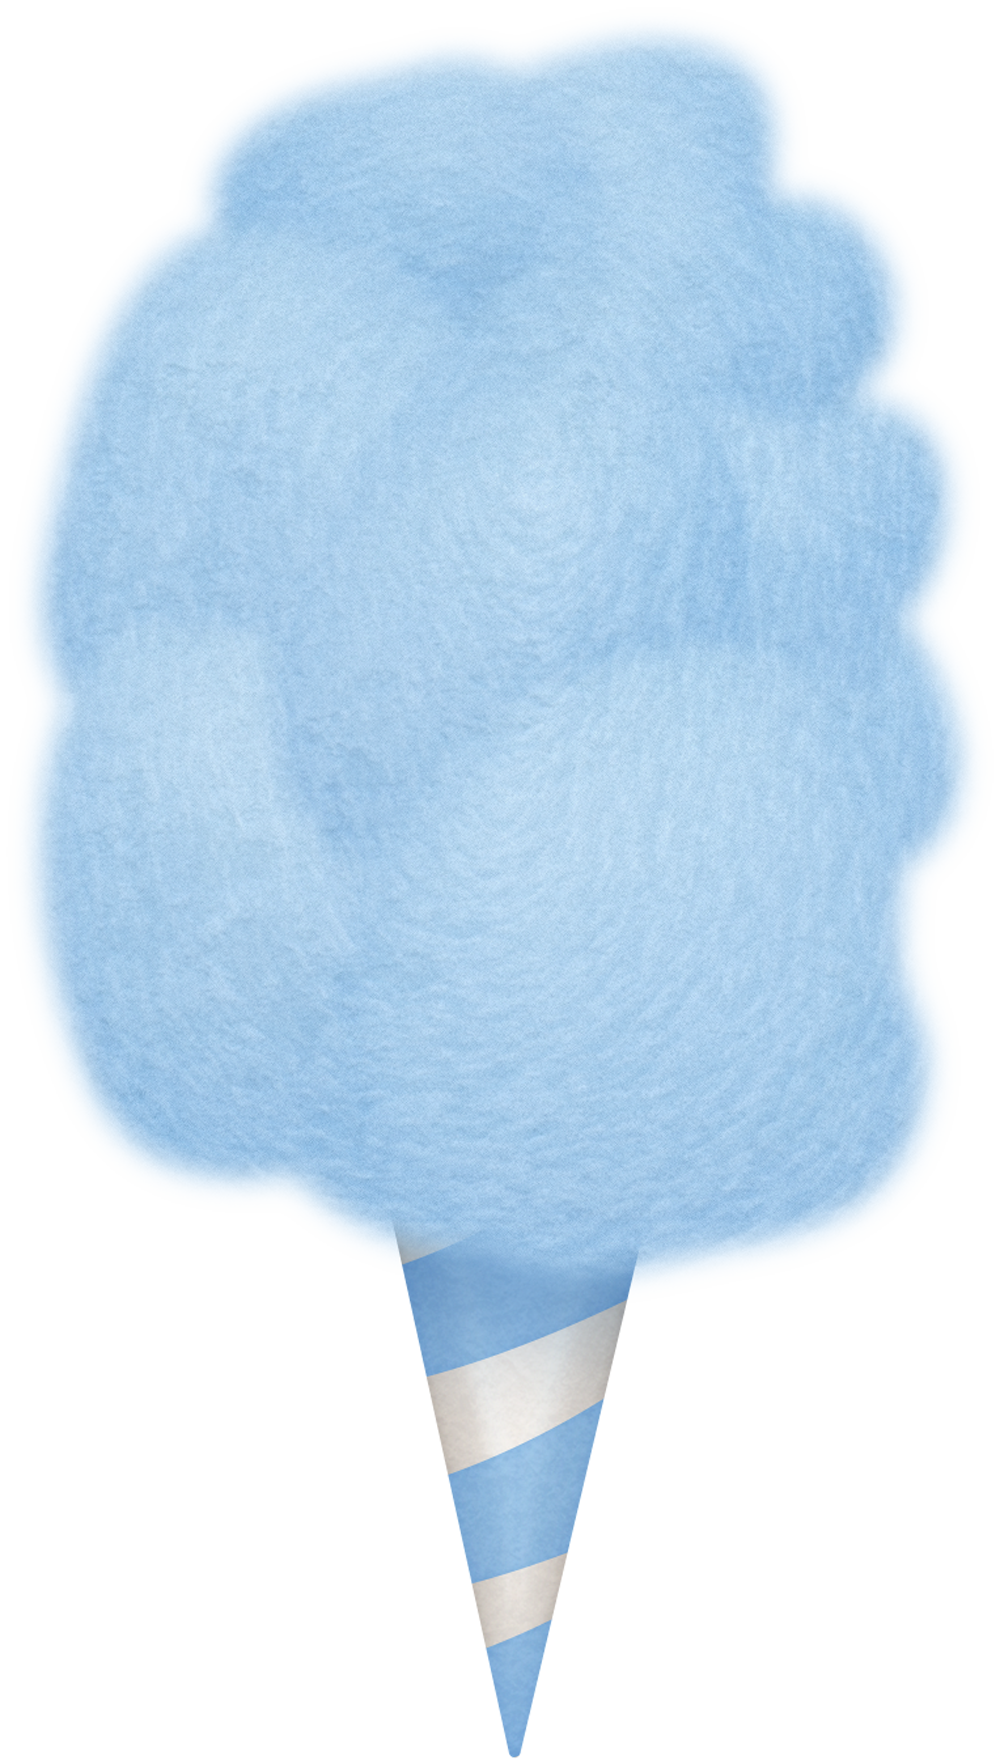 Cotton Candy Transparent PNG, Candy Floss images Free Download - Free